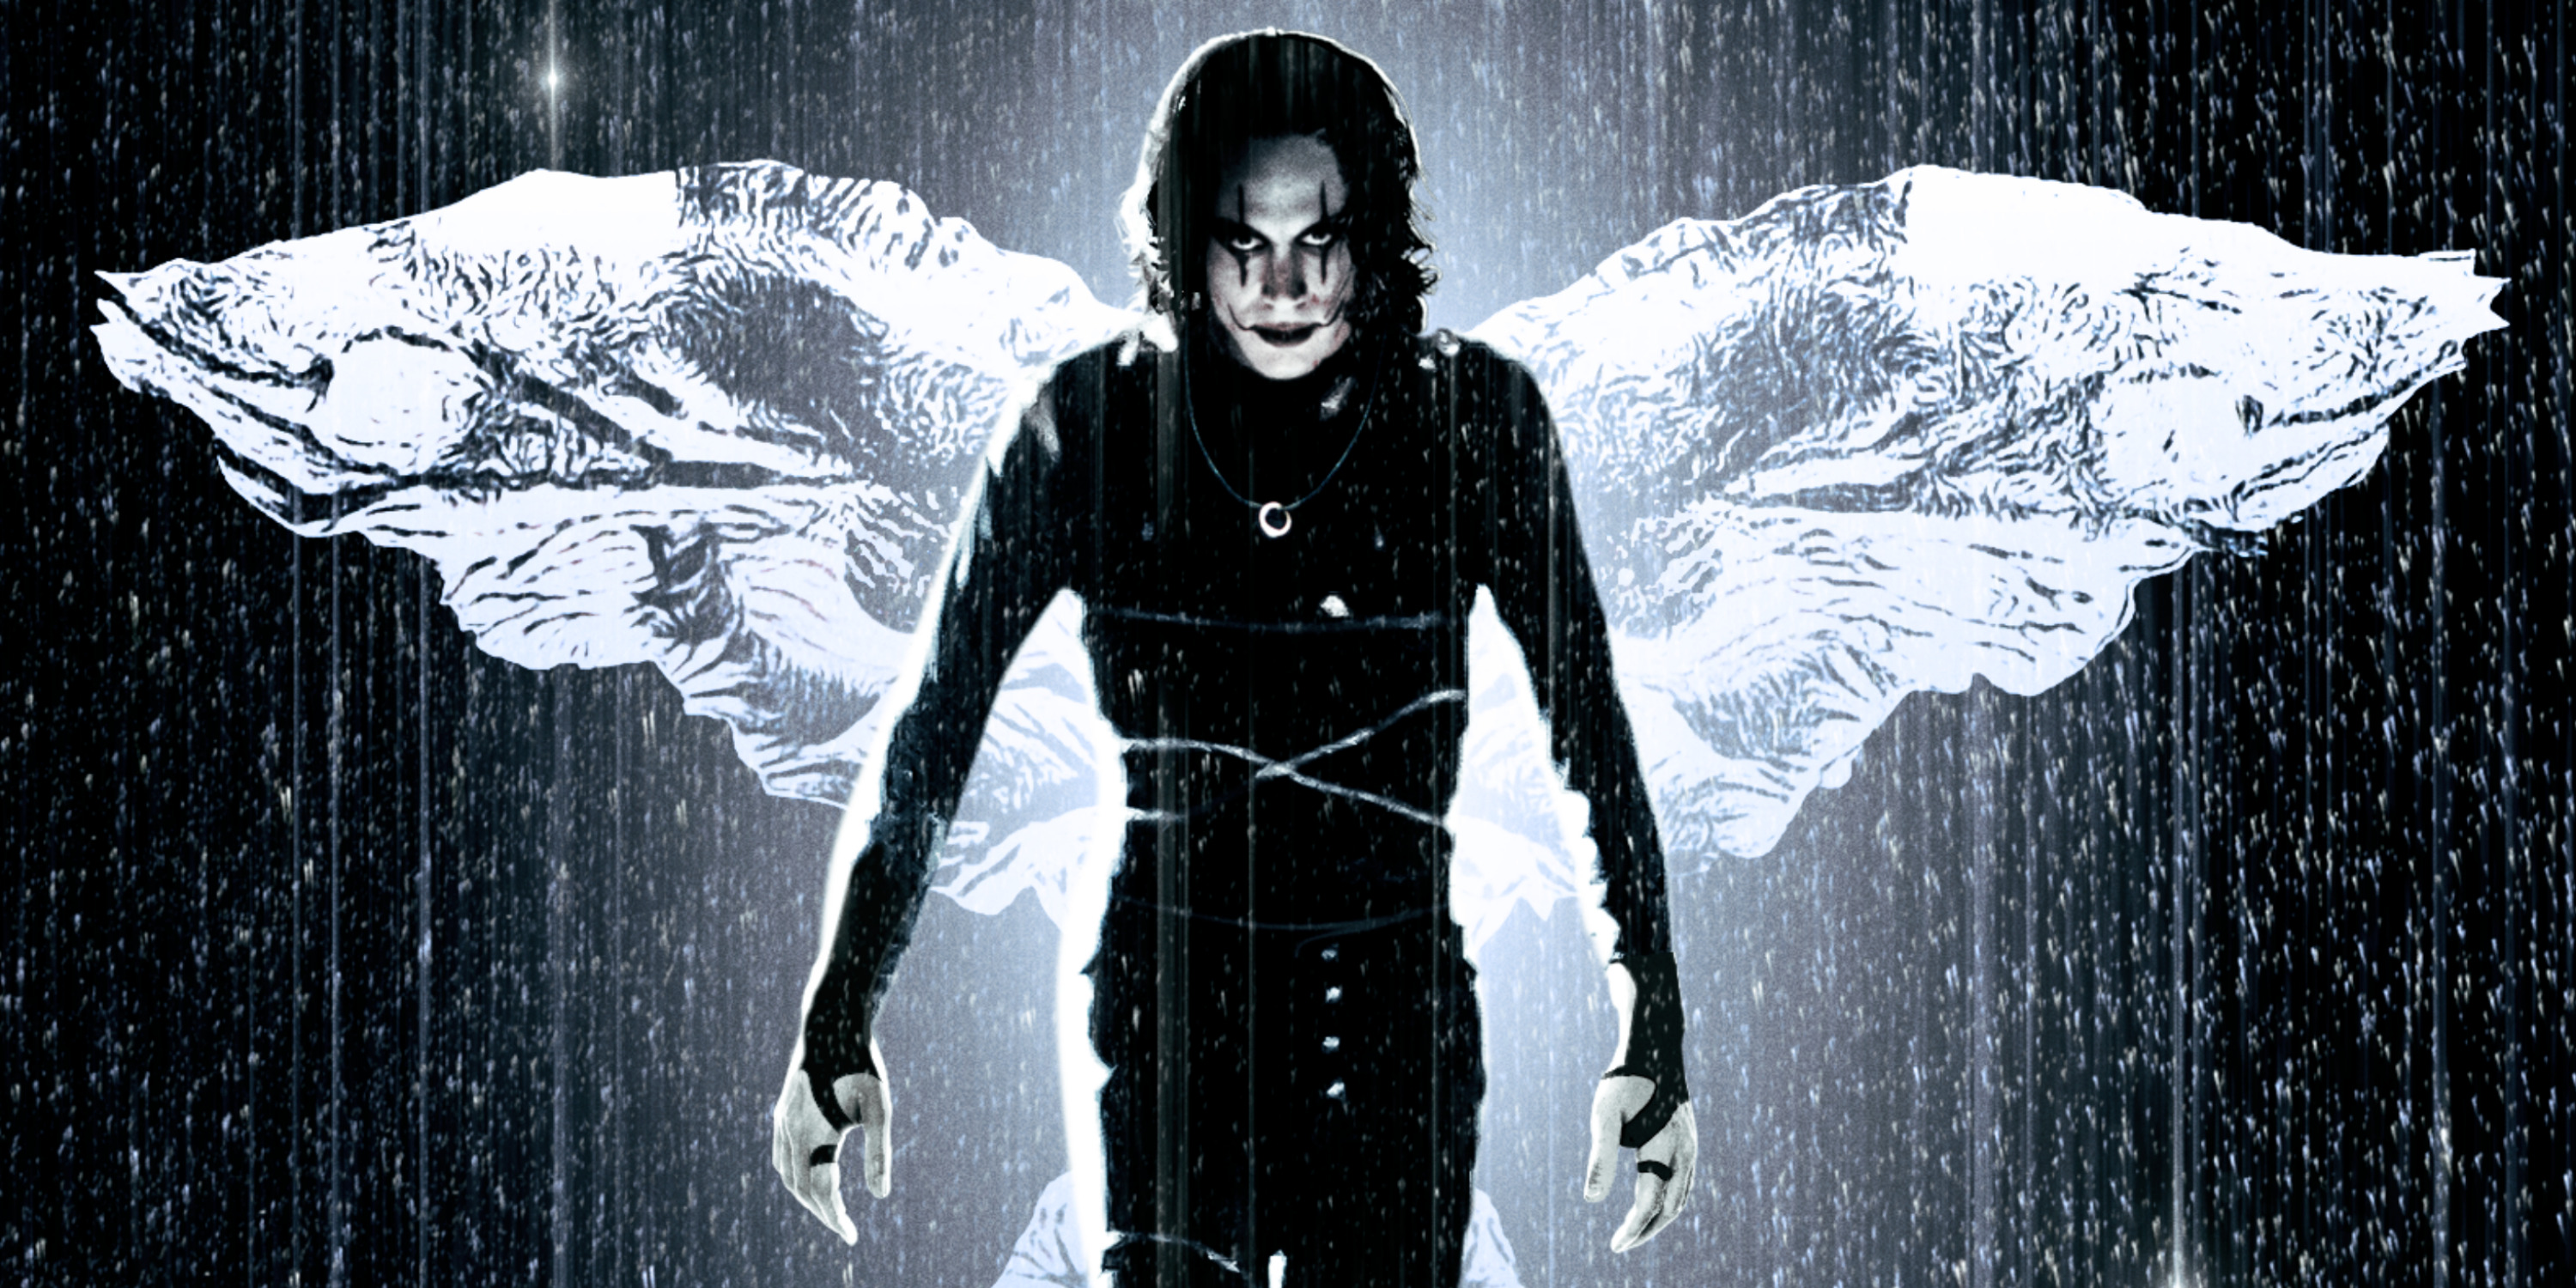 The Crow 30th anniversary cover artwork with Brandon Lee in full black costume and makeup